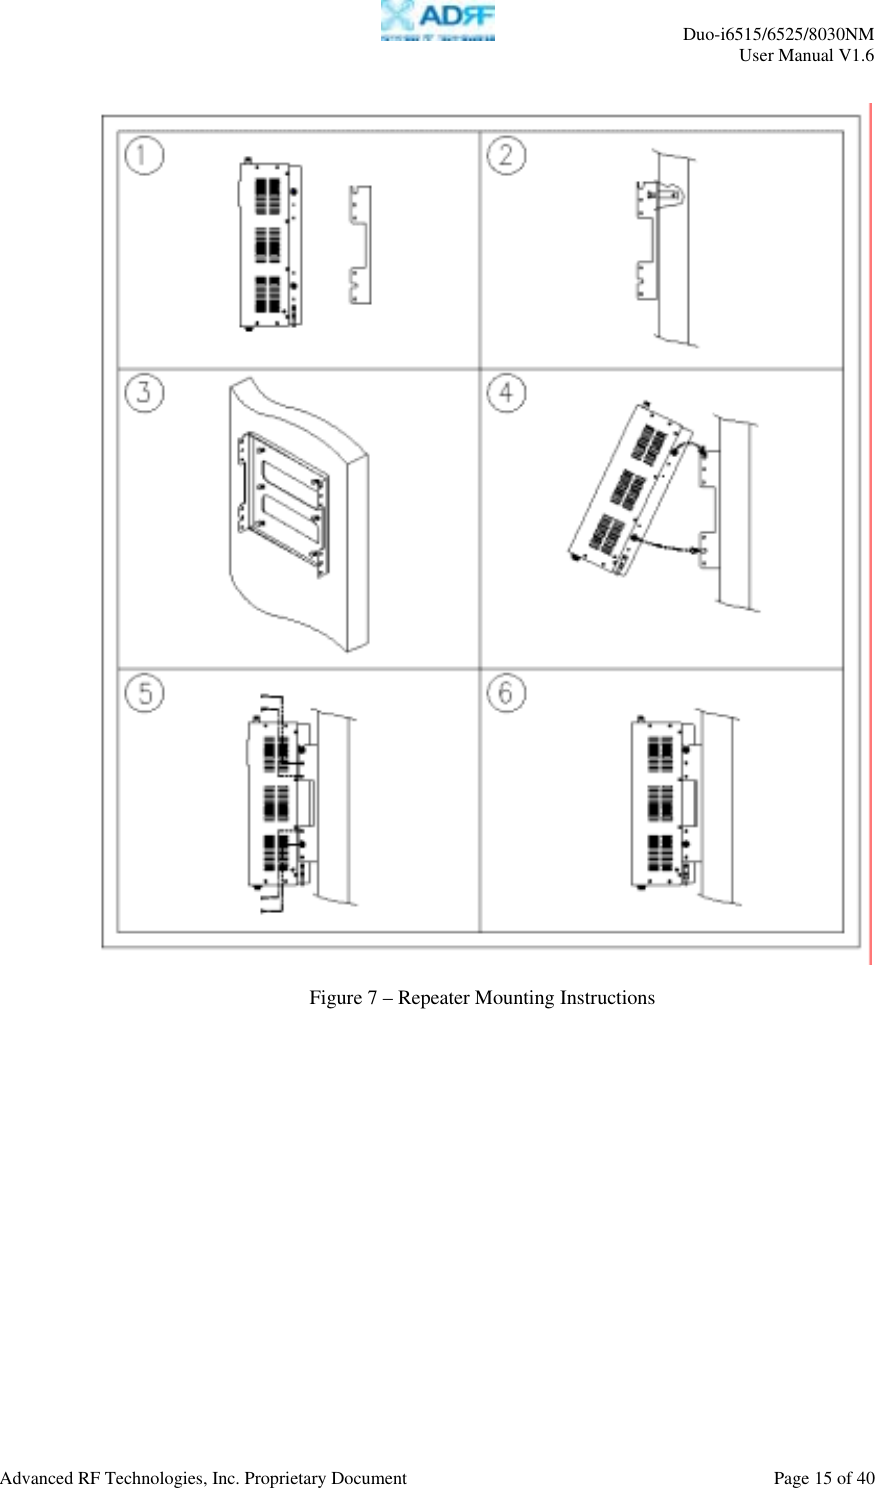     Duo-i6515/6525/8030NM  User Manual V1.6  Advanced RF Technologies, Inc. Proprietary Document    Page 15 of 40     Figure 7 – Repeater Mounting Instructions 